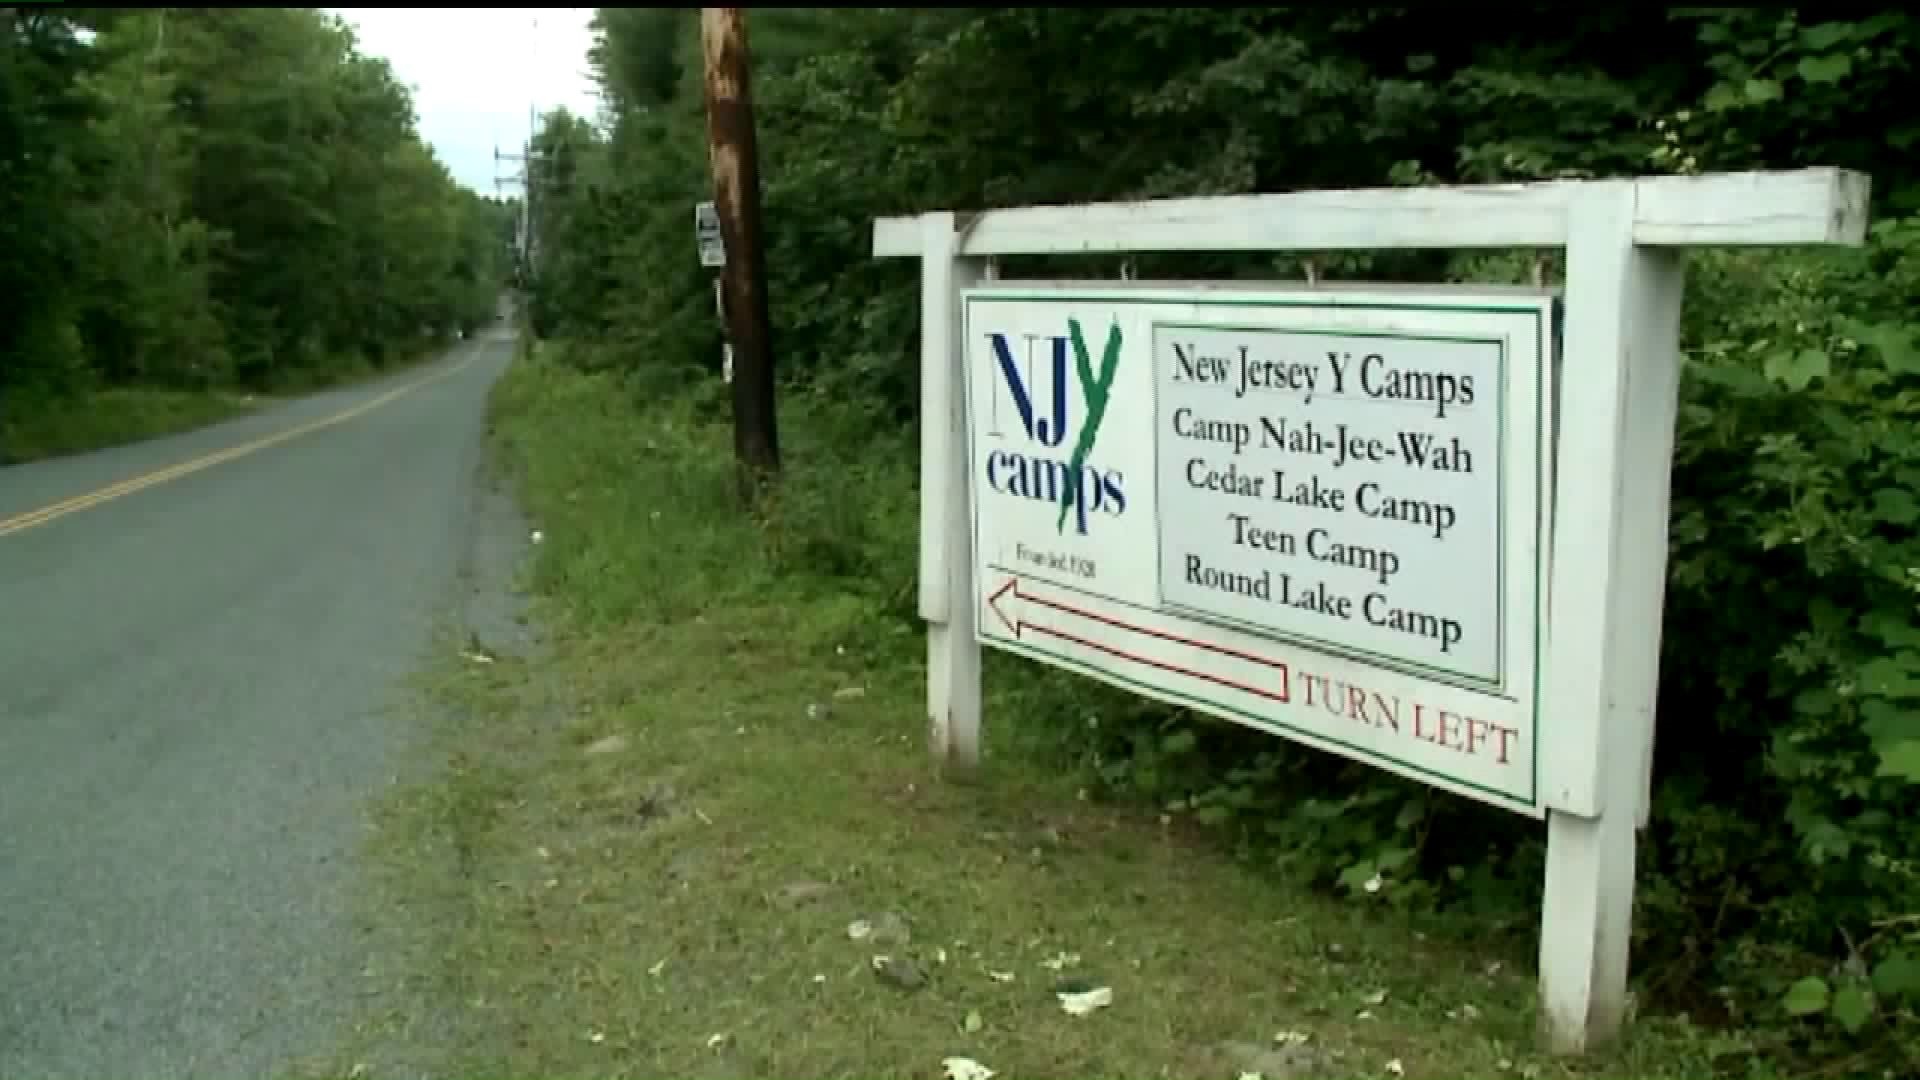 11 Year Old Died of Meningitis at Camp in the Poconos: Report